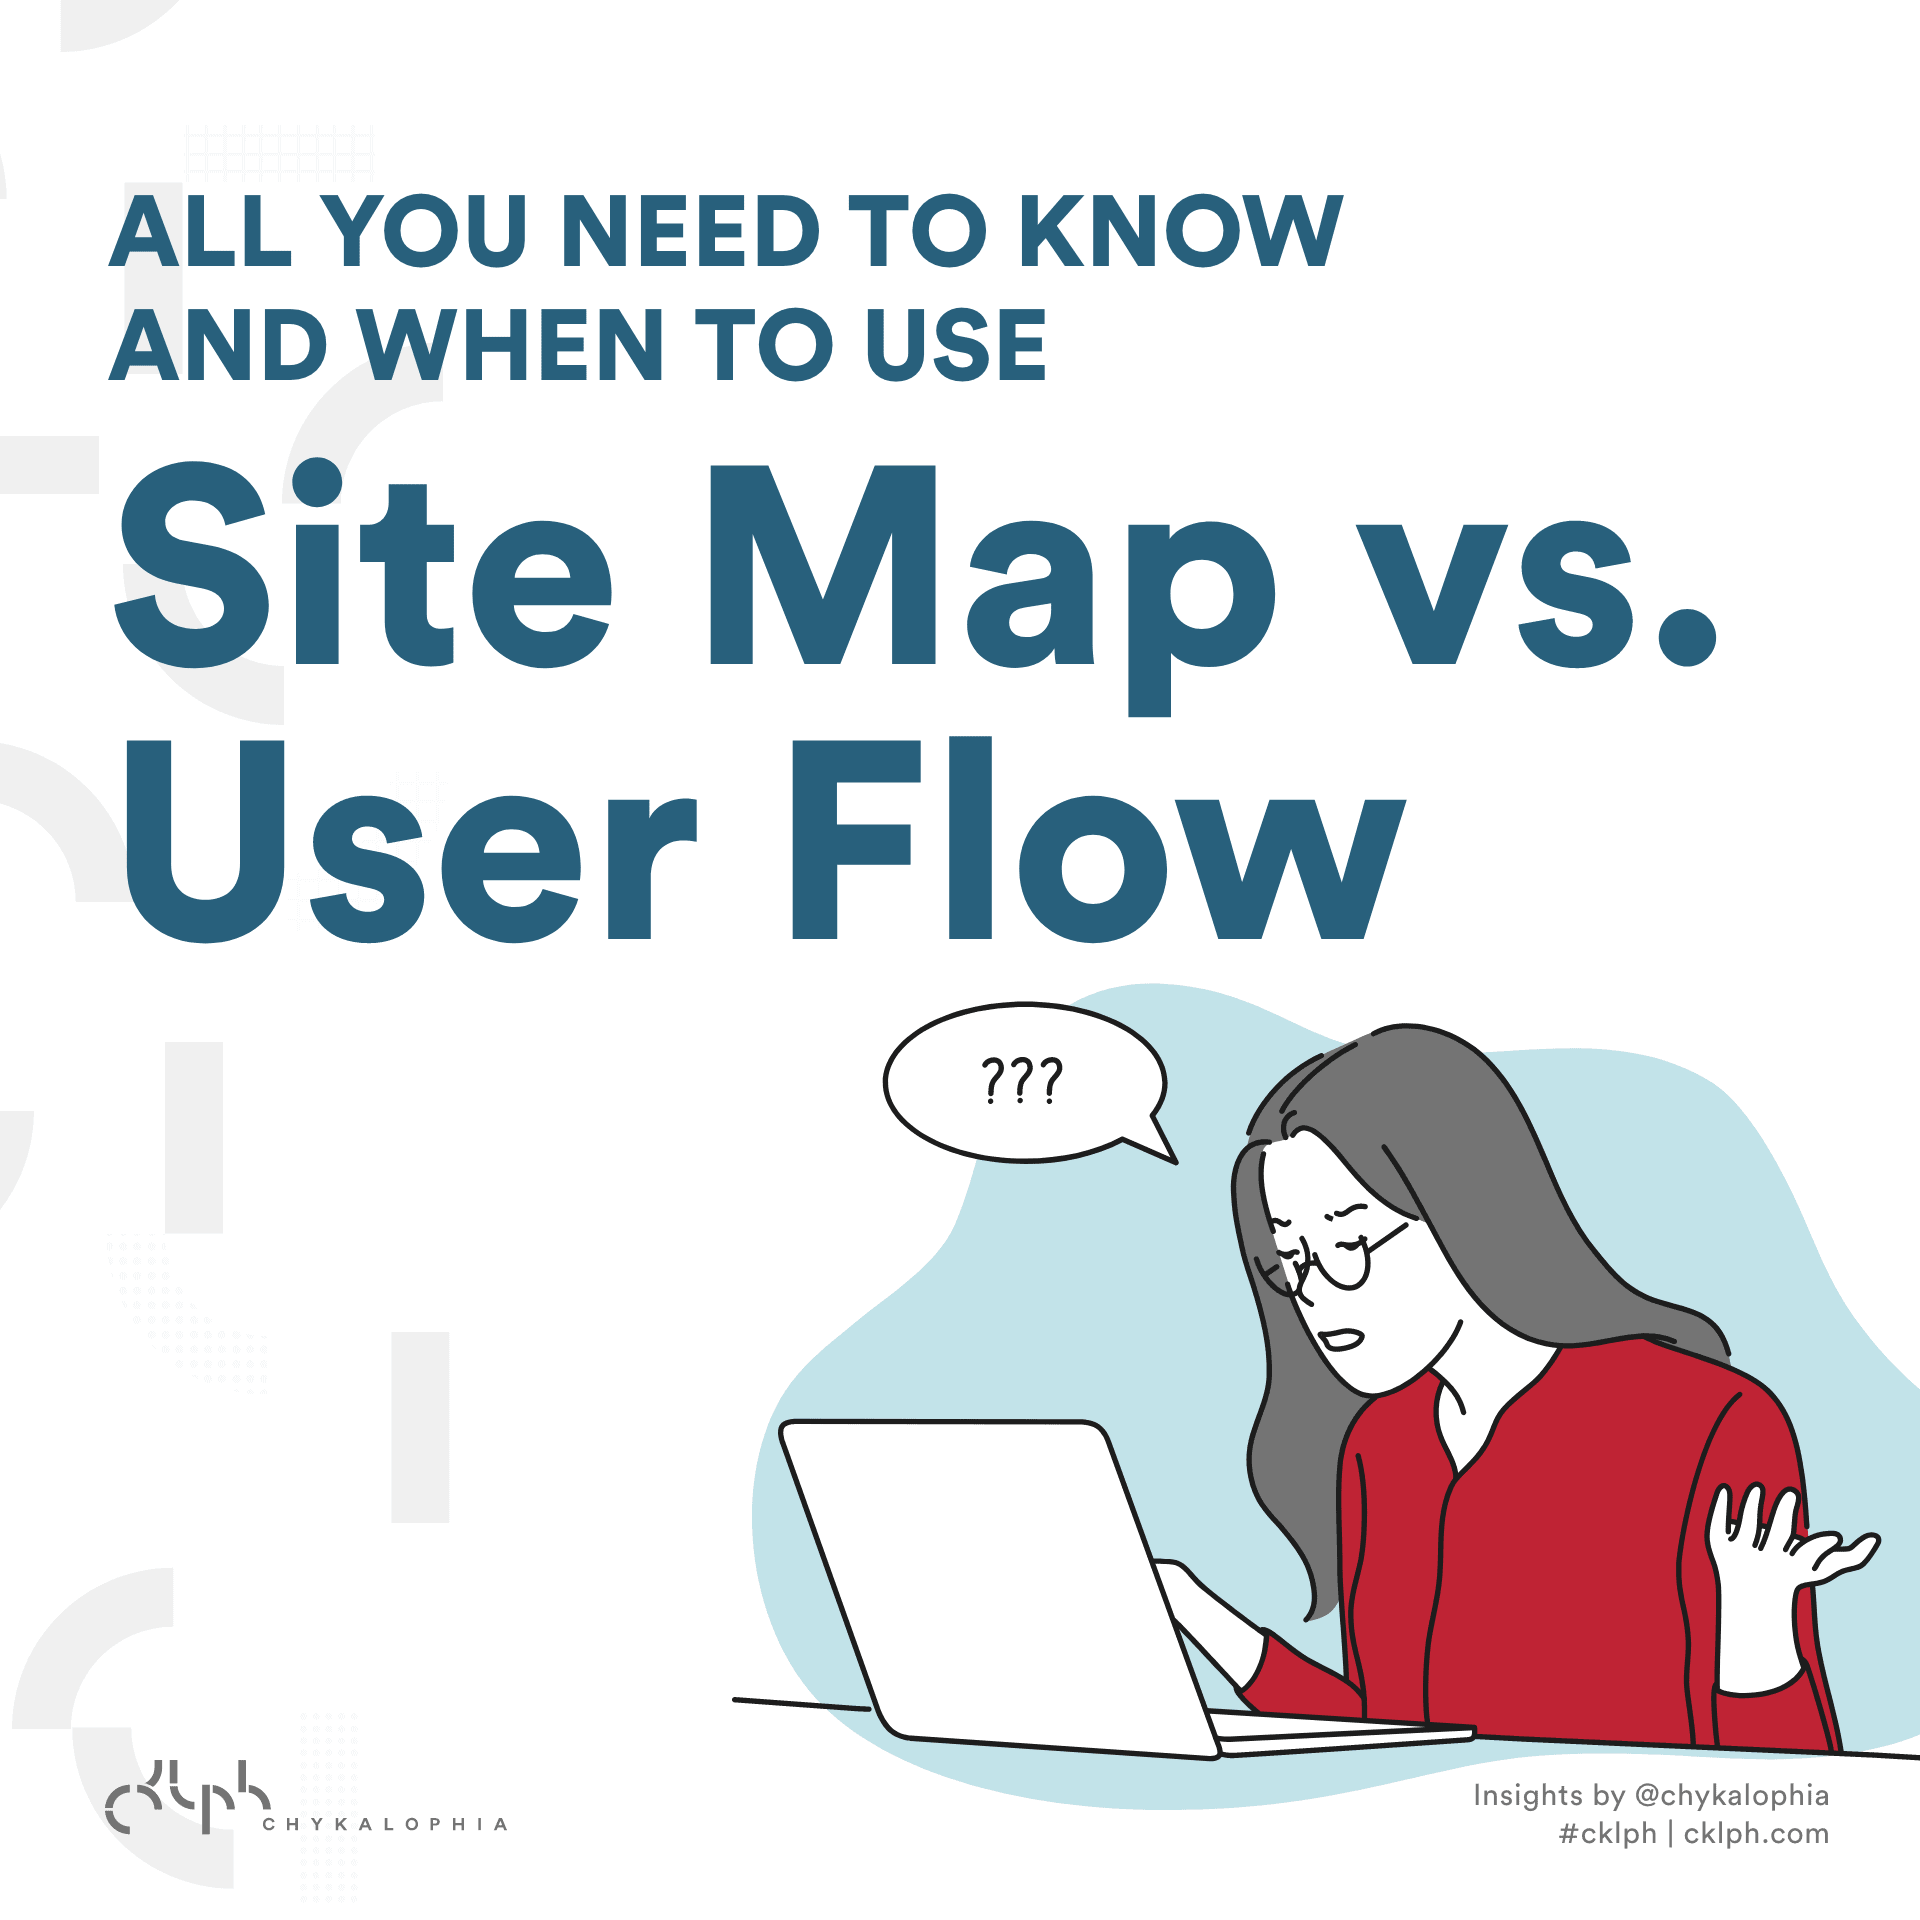 All You Need to Know and When to Use Sitemap vs. User Flow